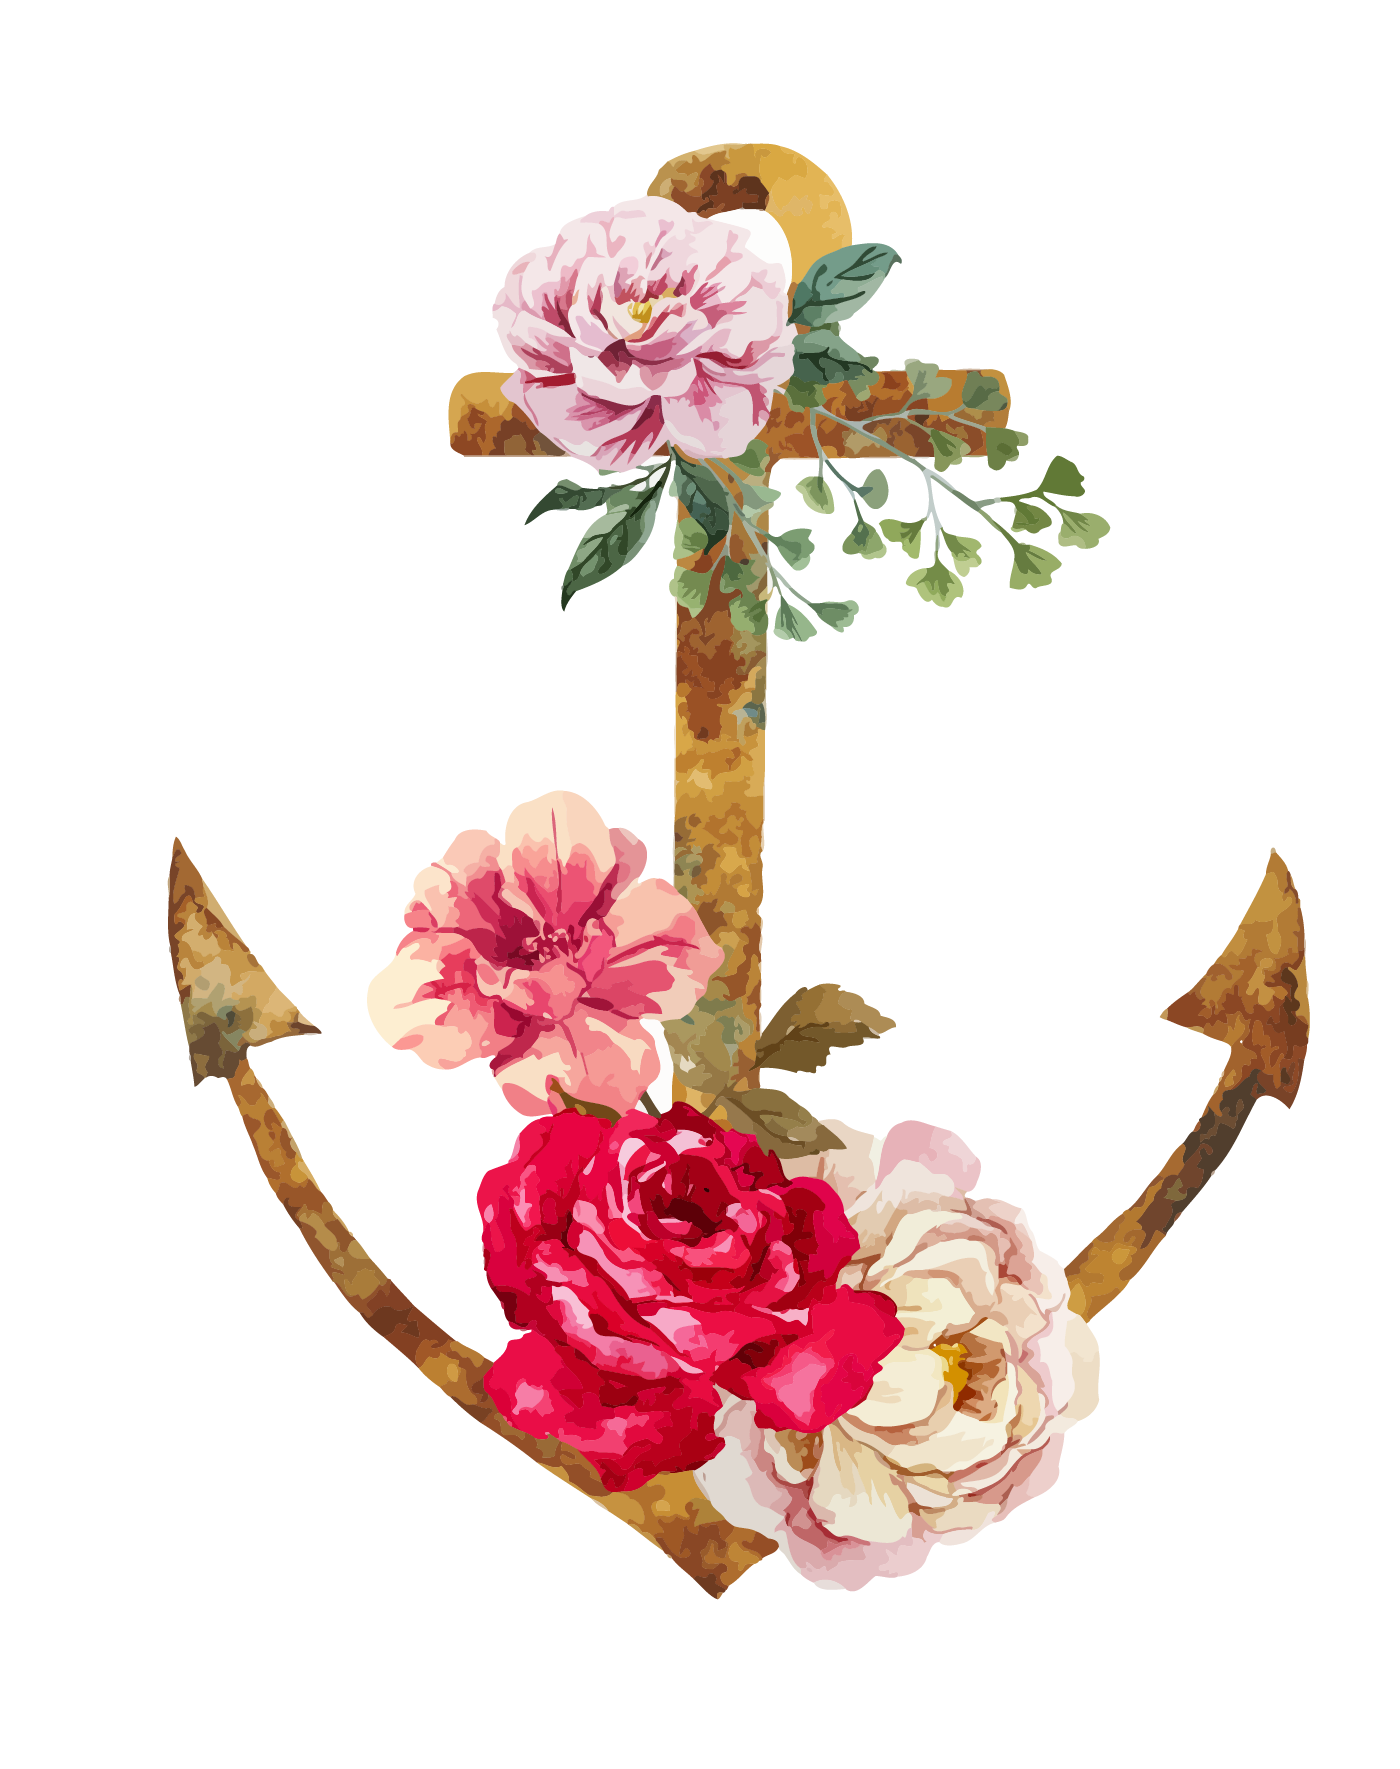 Tattoo Flower Illustration Watercolor Fresh Flowers Anchor Clipart